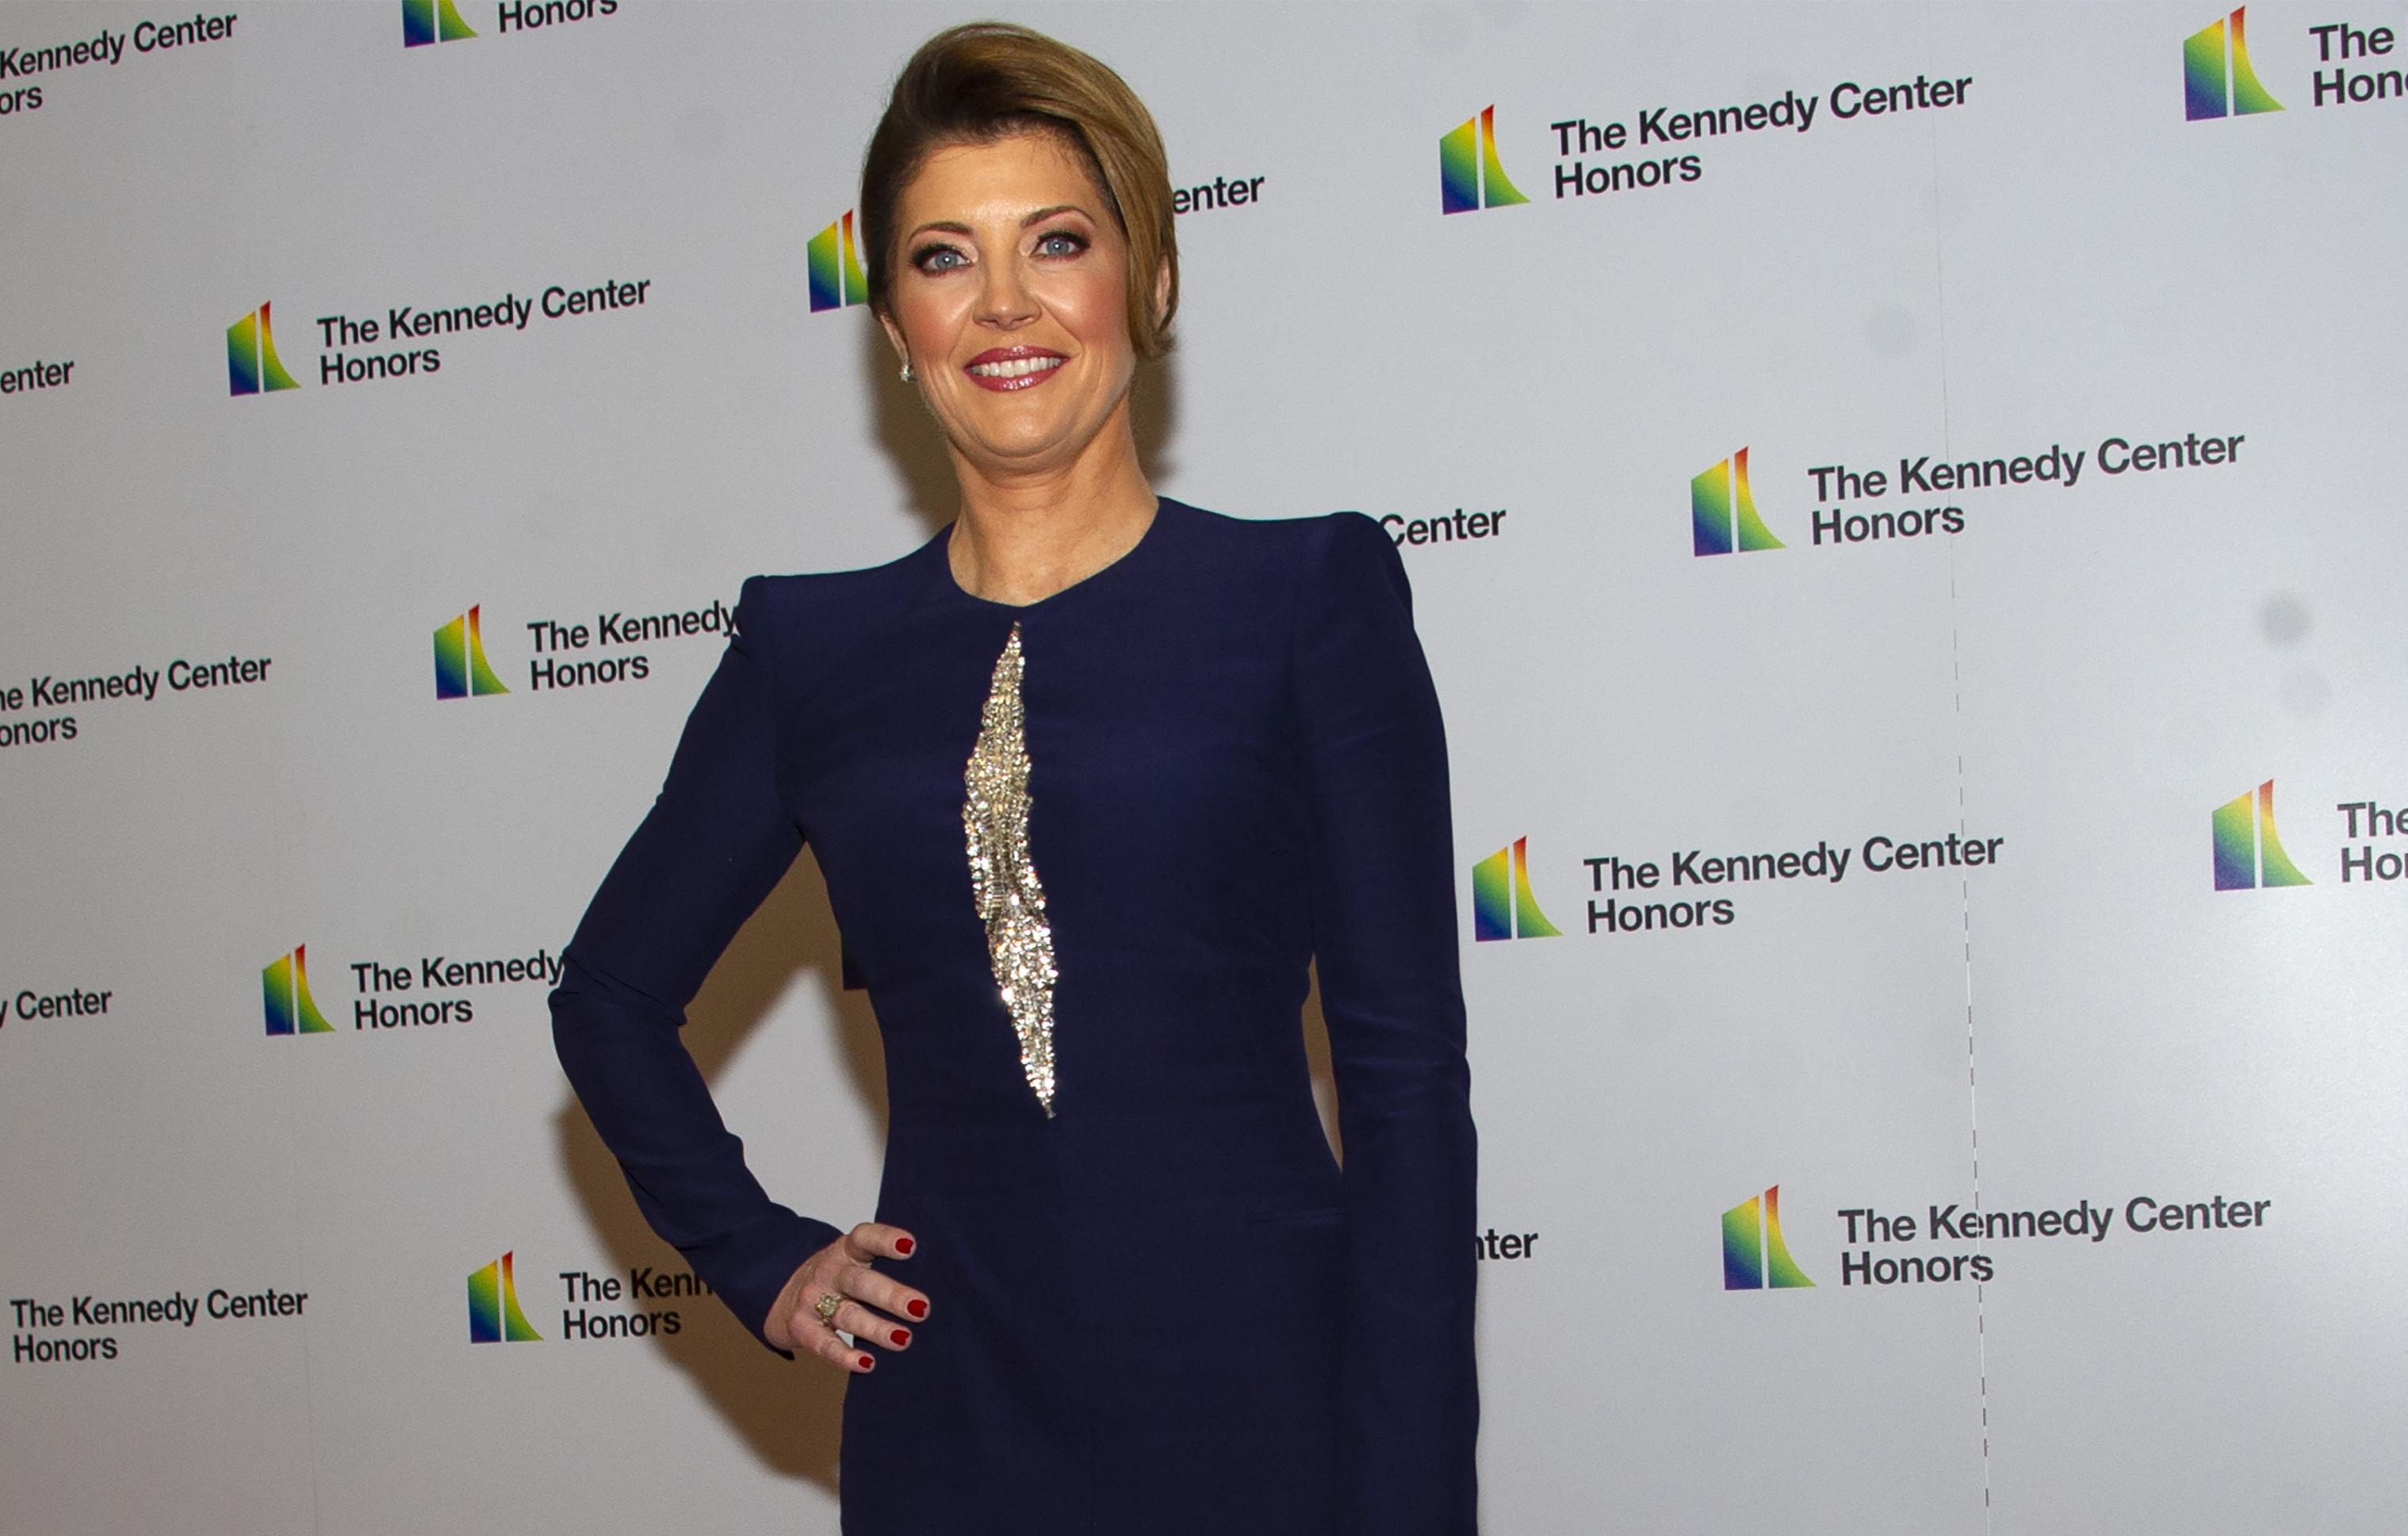 Norah O'Donnell May Be Out At 'CBS Evening News' Report